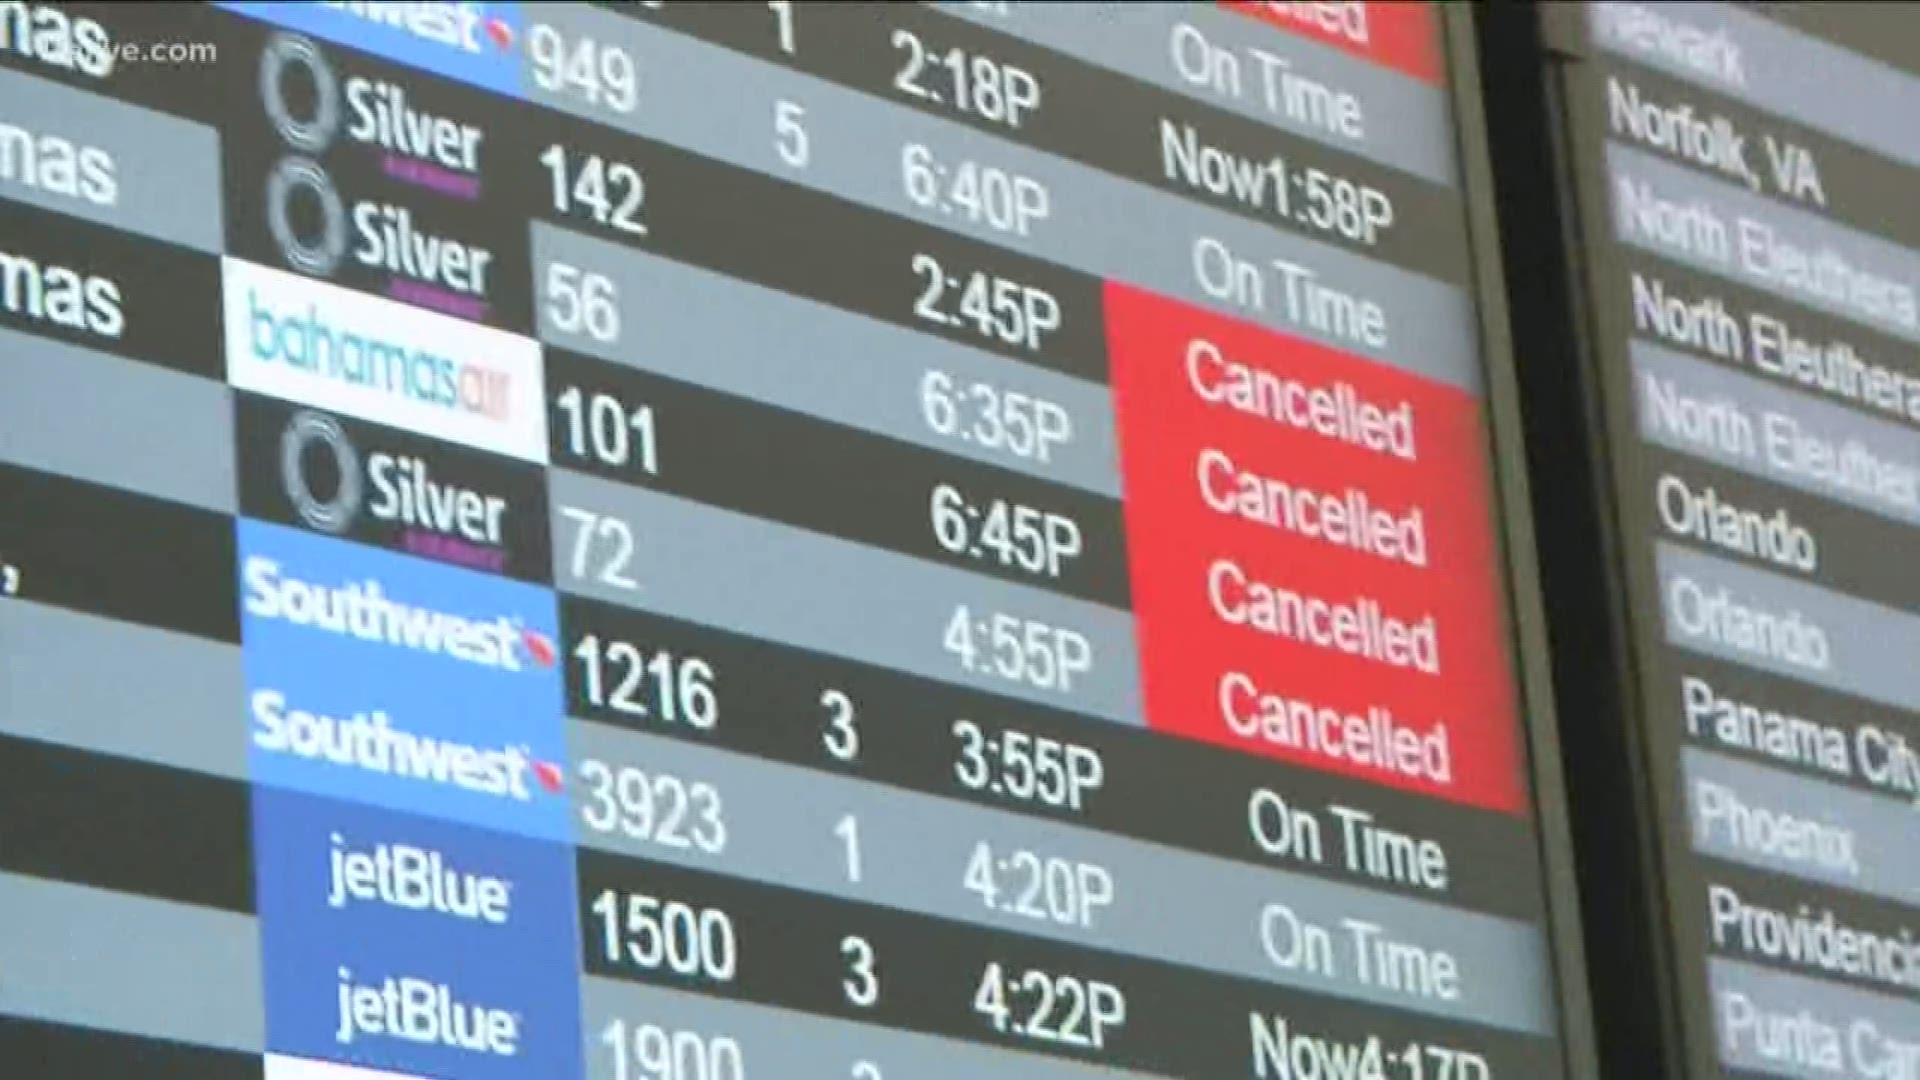 The number could rise as conditions develop, and more than 1,800 flights wound up getting canceled the previous day.